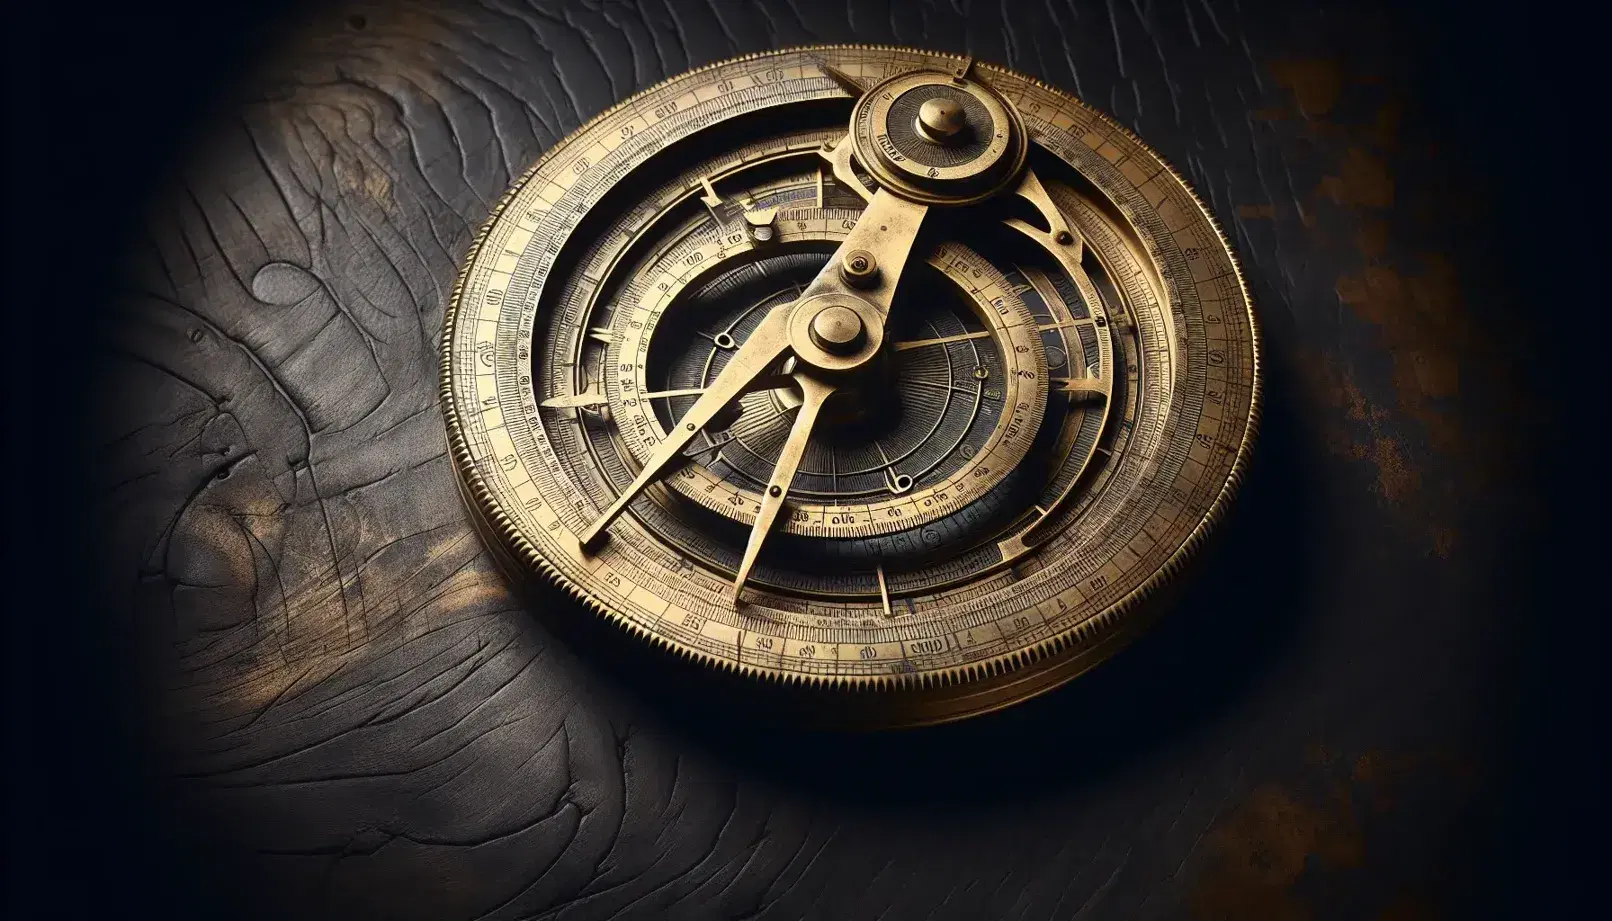 Vintage brass astrolabe on dark wood surface, with engraved concentric circles and diagonal alidade casting shadow.